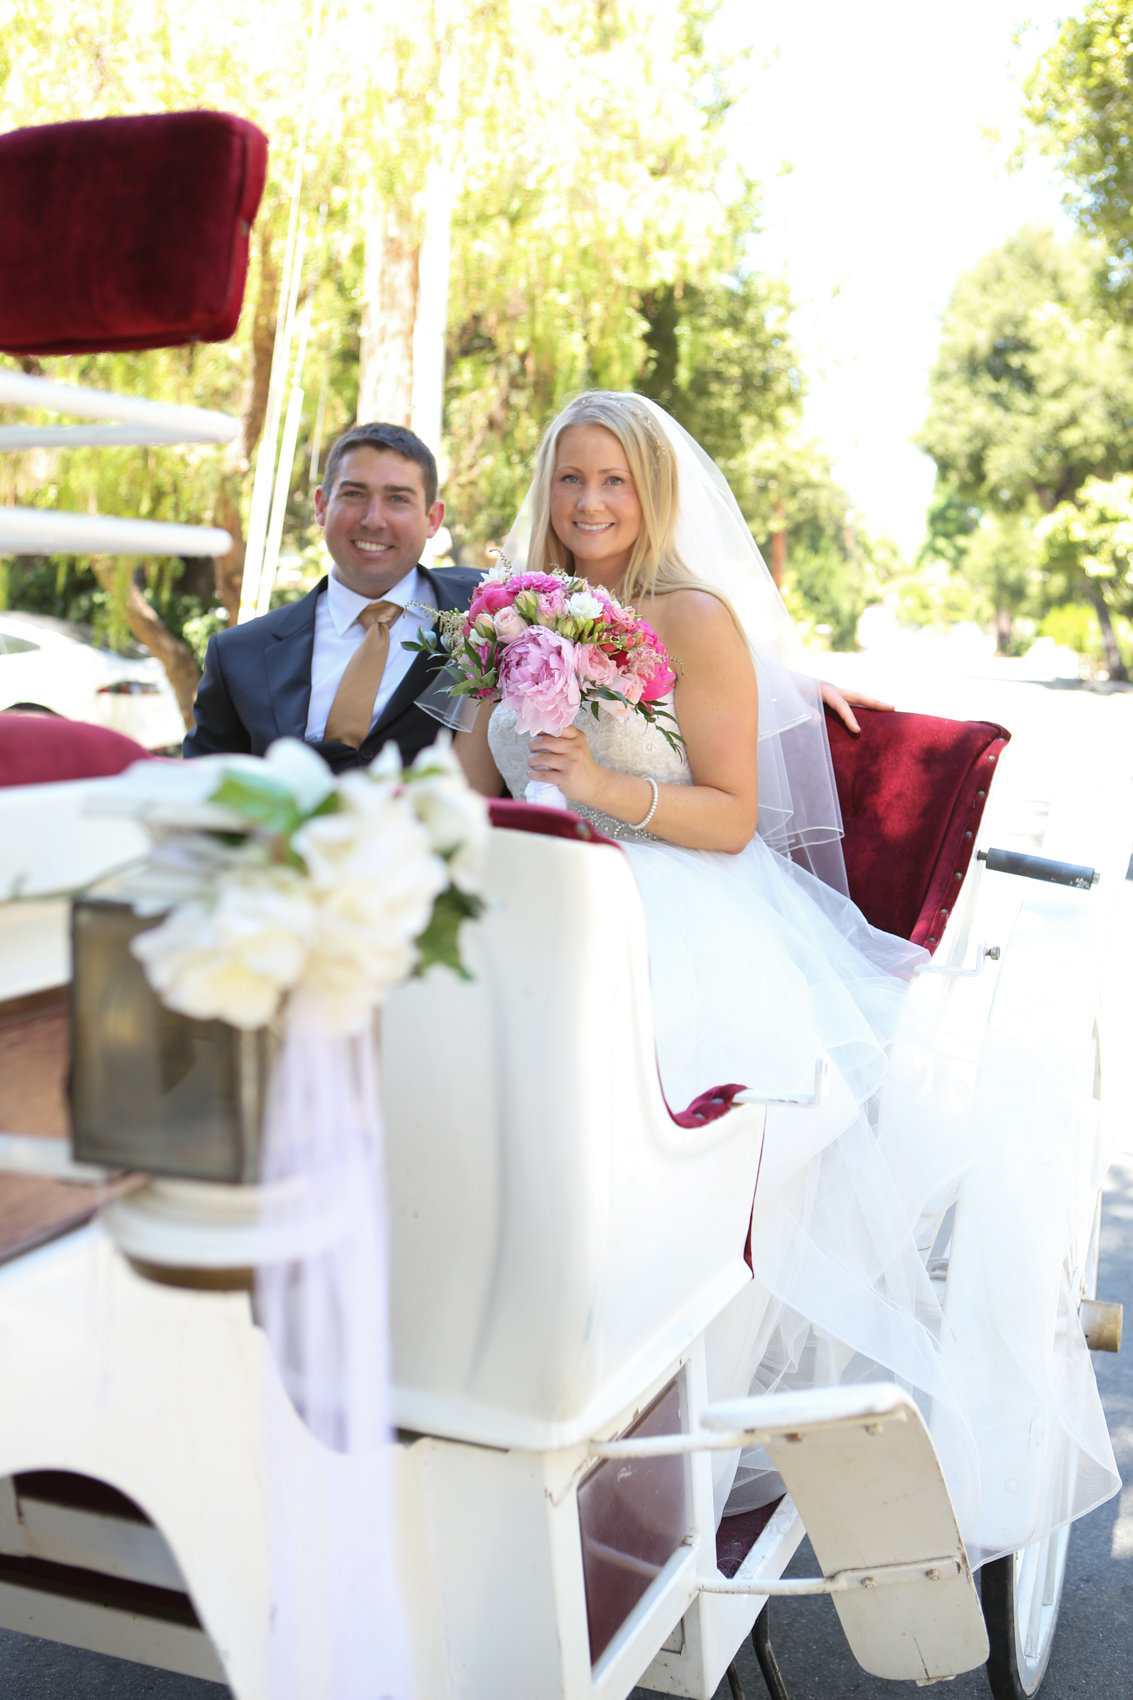 Bride and groom ride and carriage wedding photography bay area california